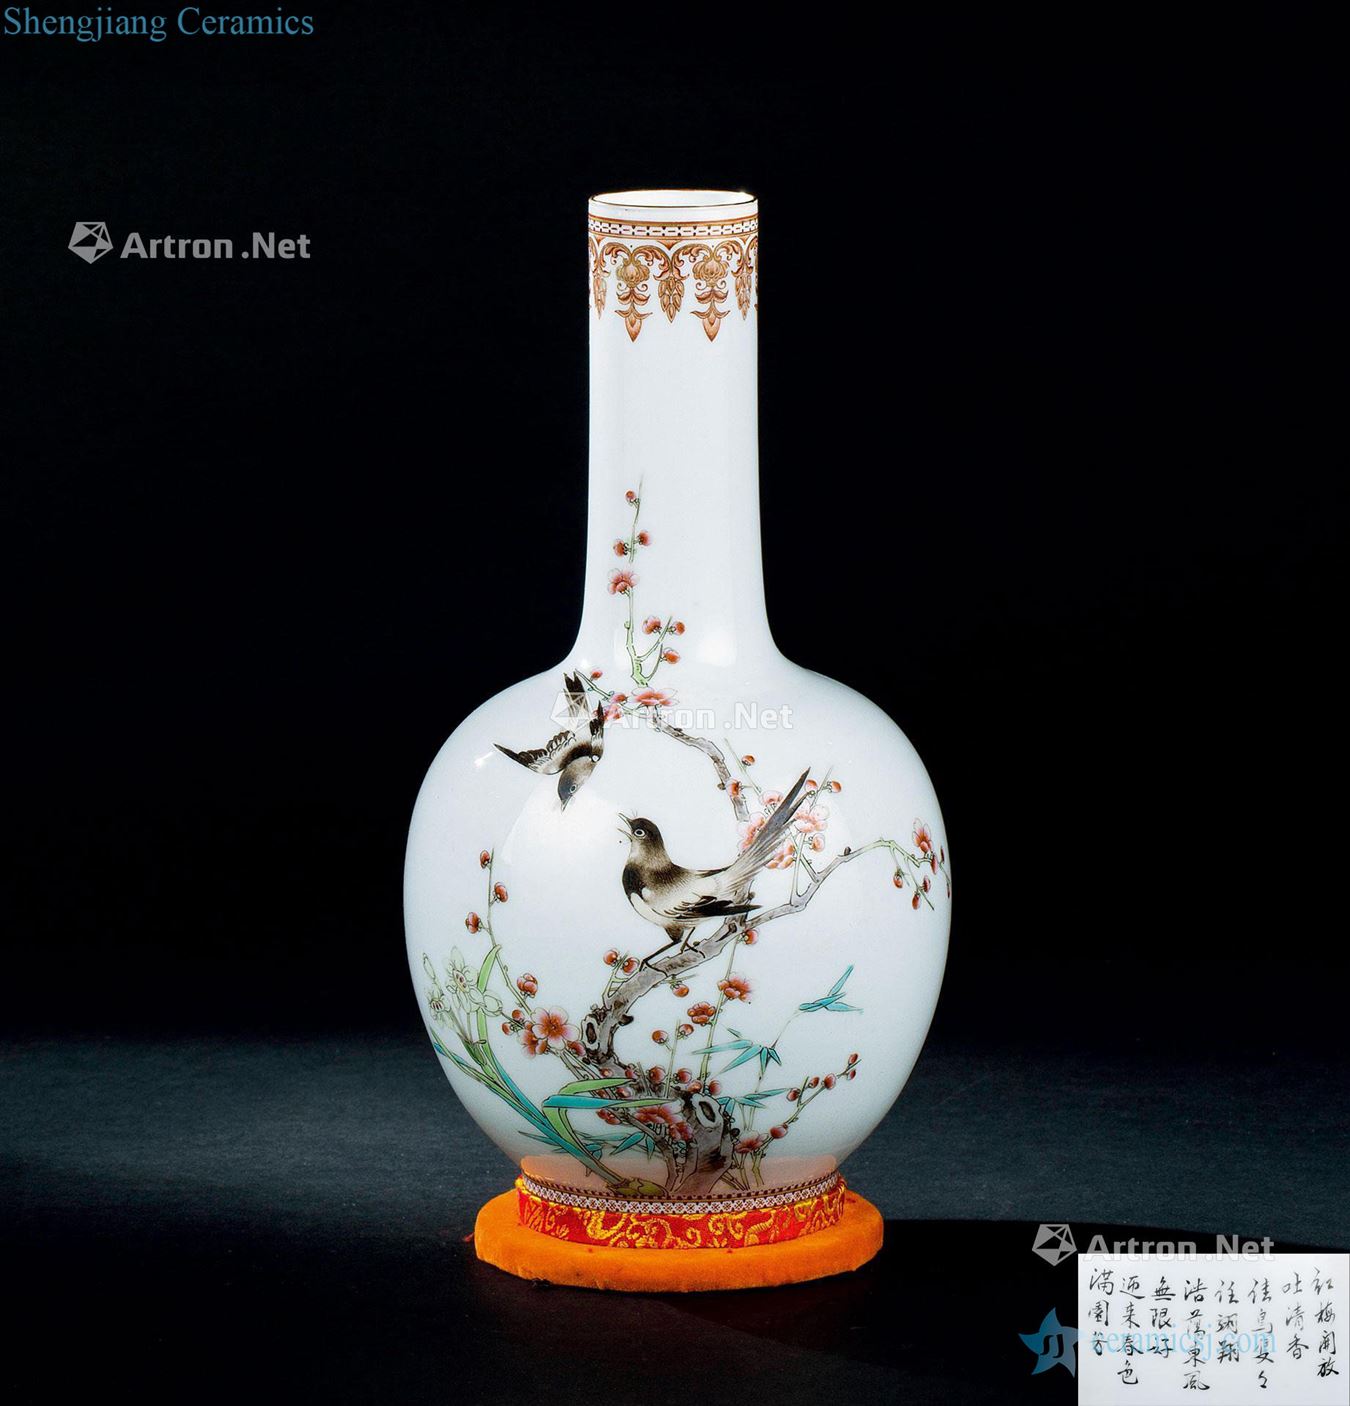 In the qing dynasty (1644-1911), beaming poetry thin foetus enamel small tree